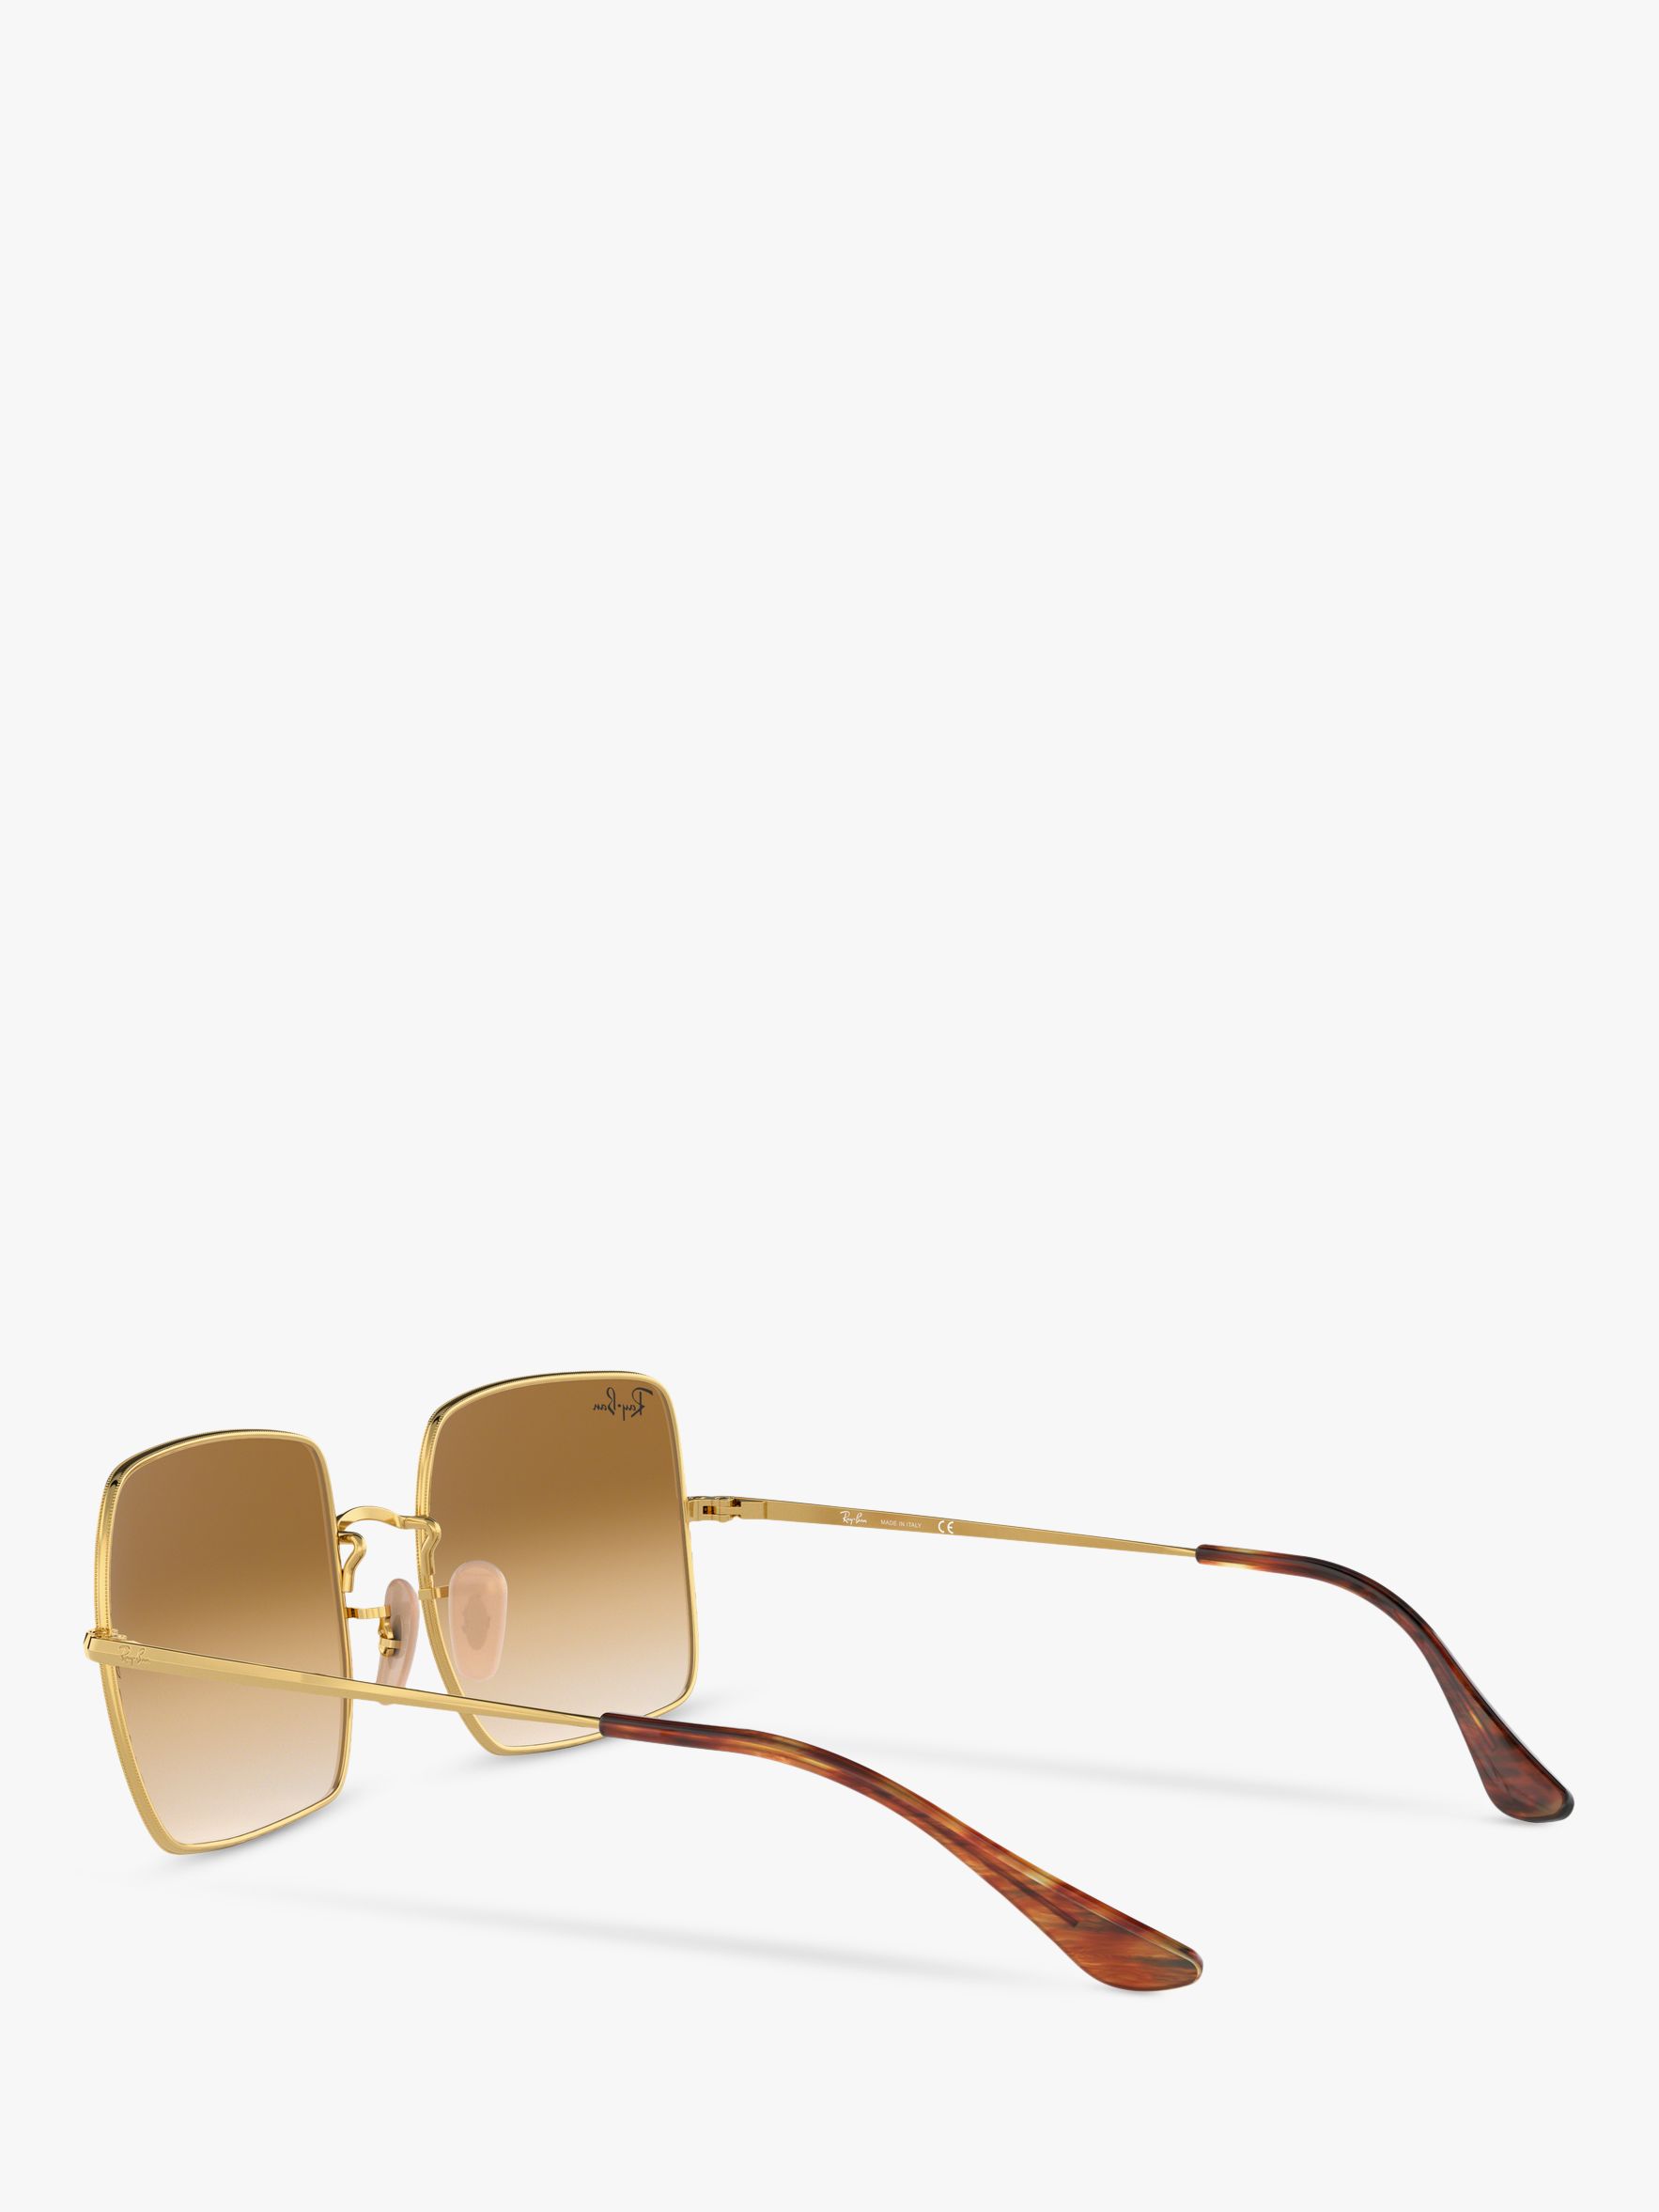 Ray-Ban RB1971 Unisex Square Sunglasses, Gold/Brown Gradient at John ...